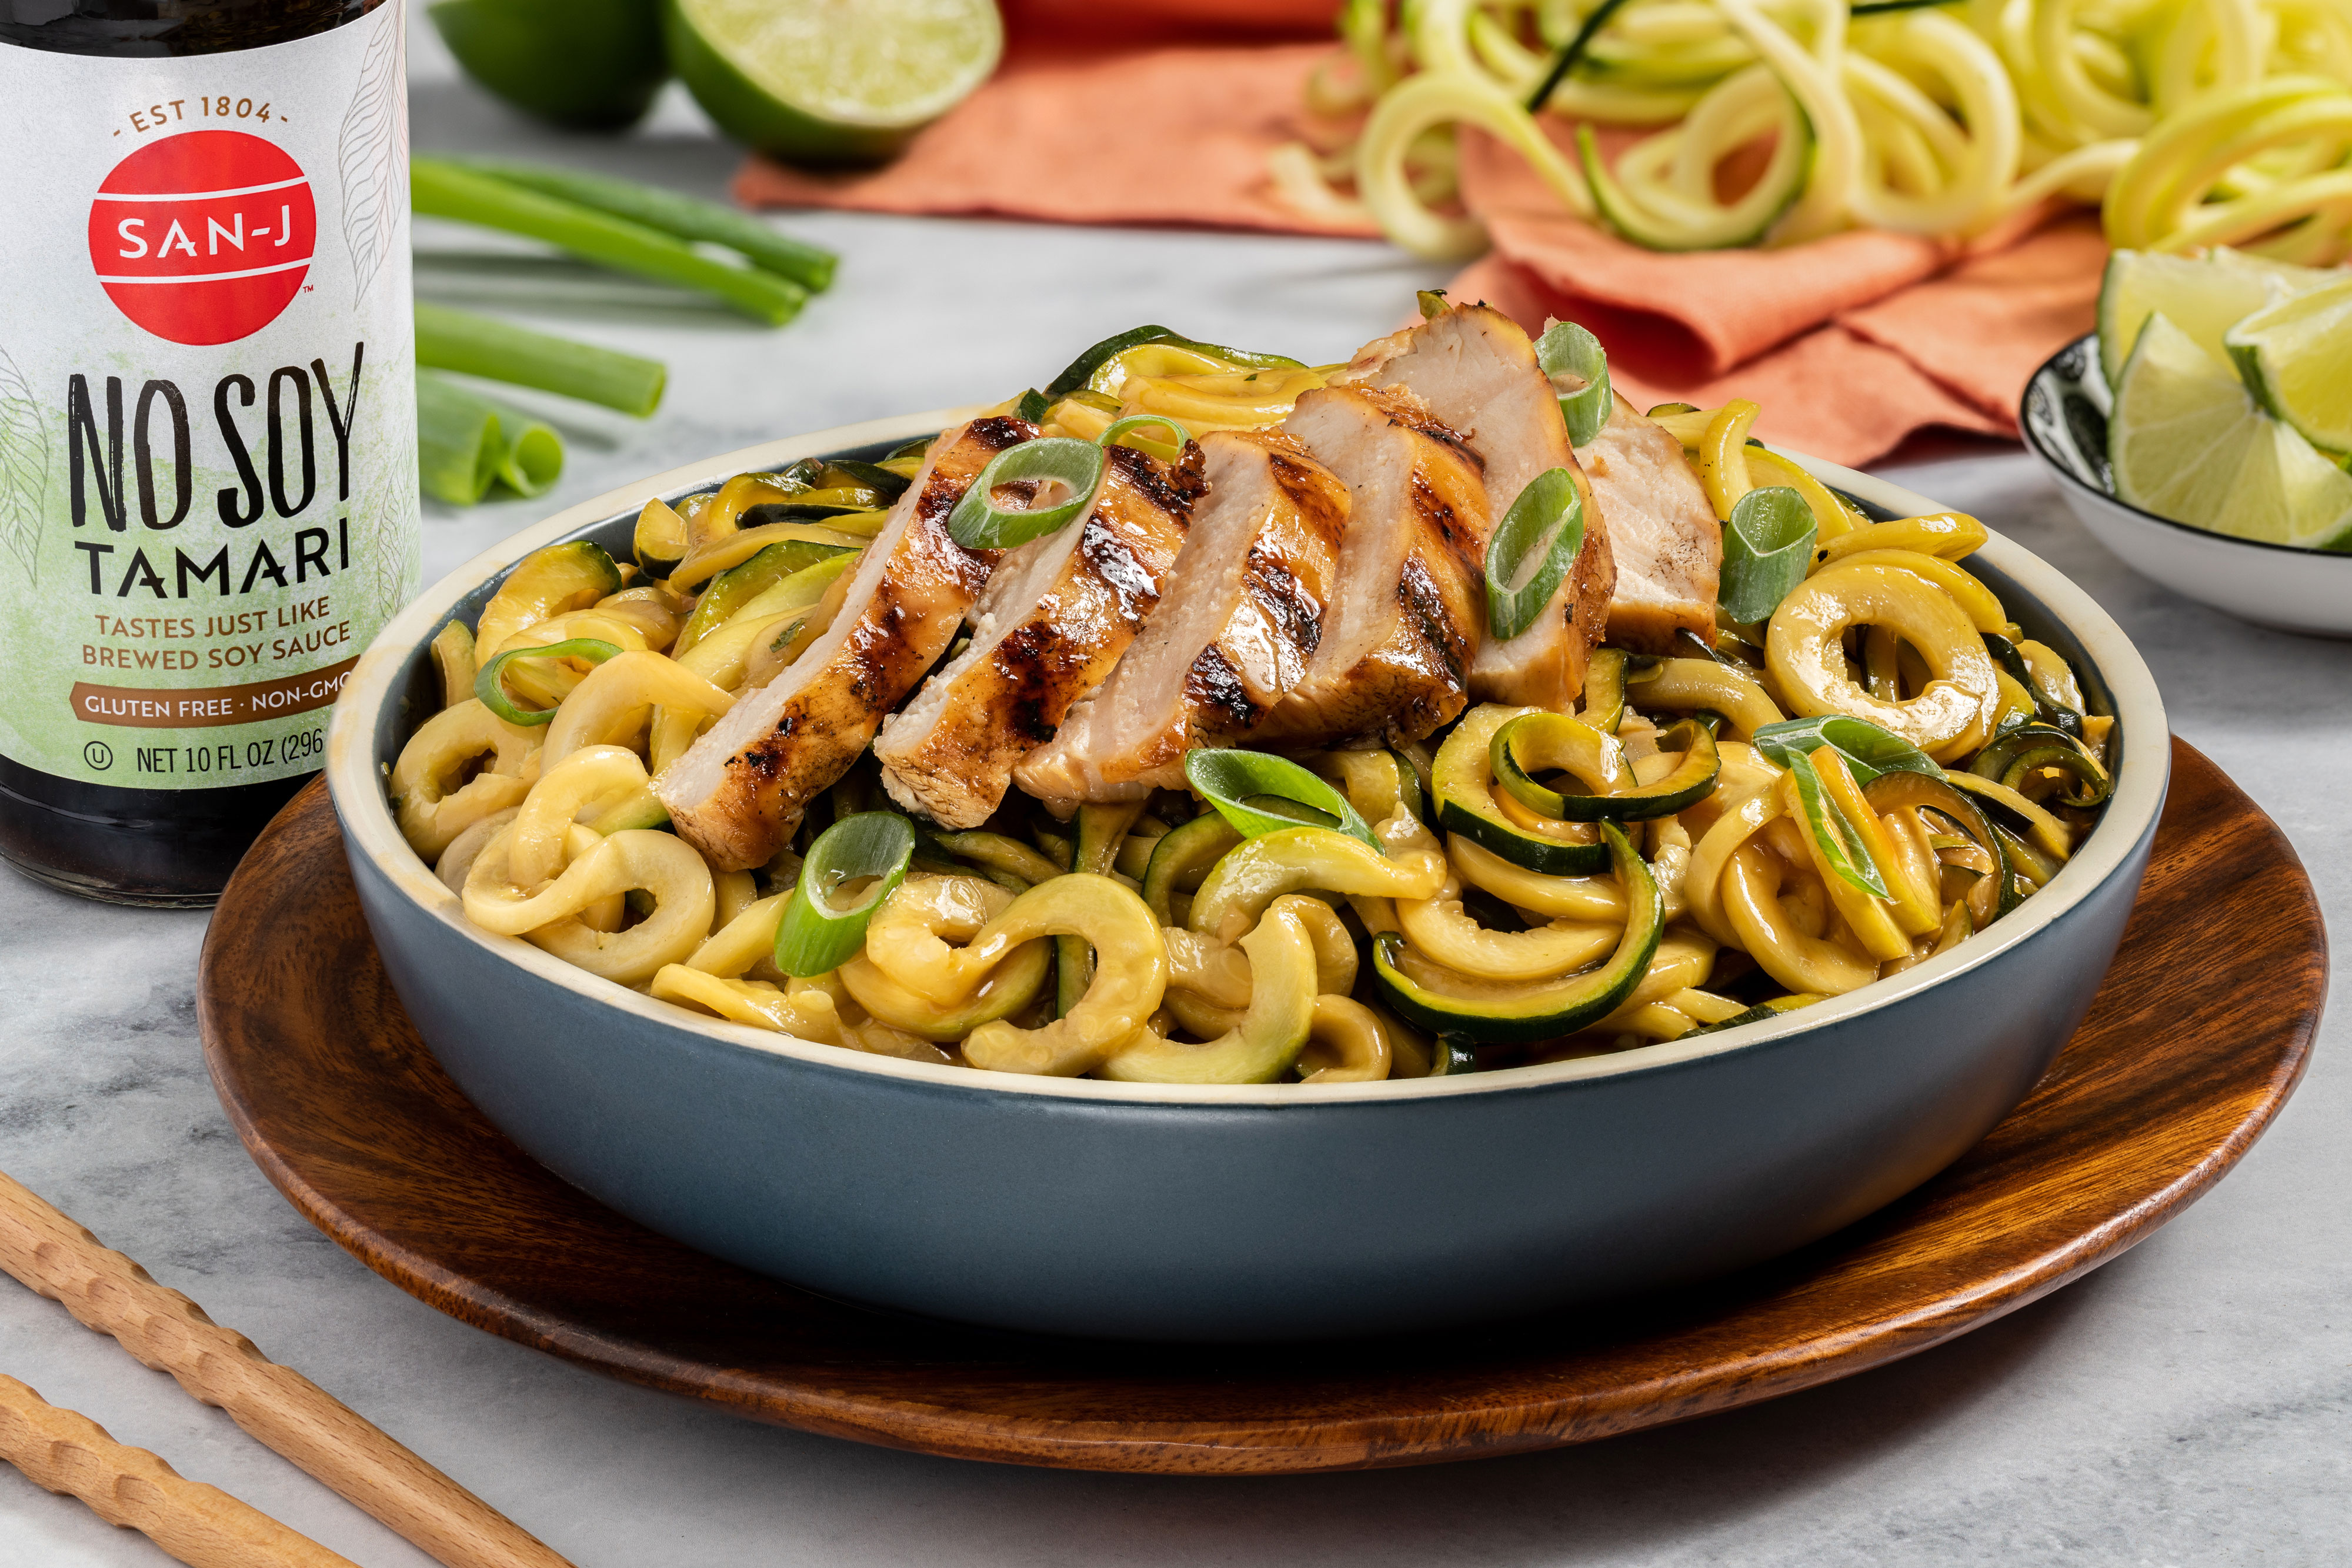 Thai chicken zucchini noodle bowl made with San-J No Soy Tamari